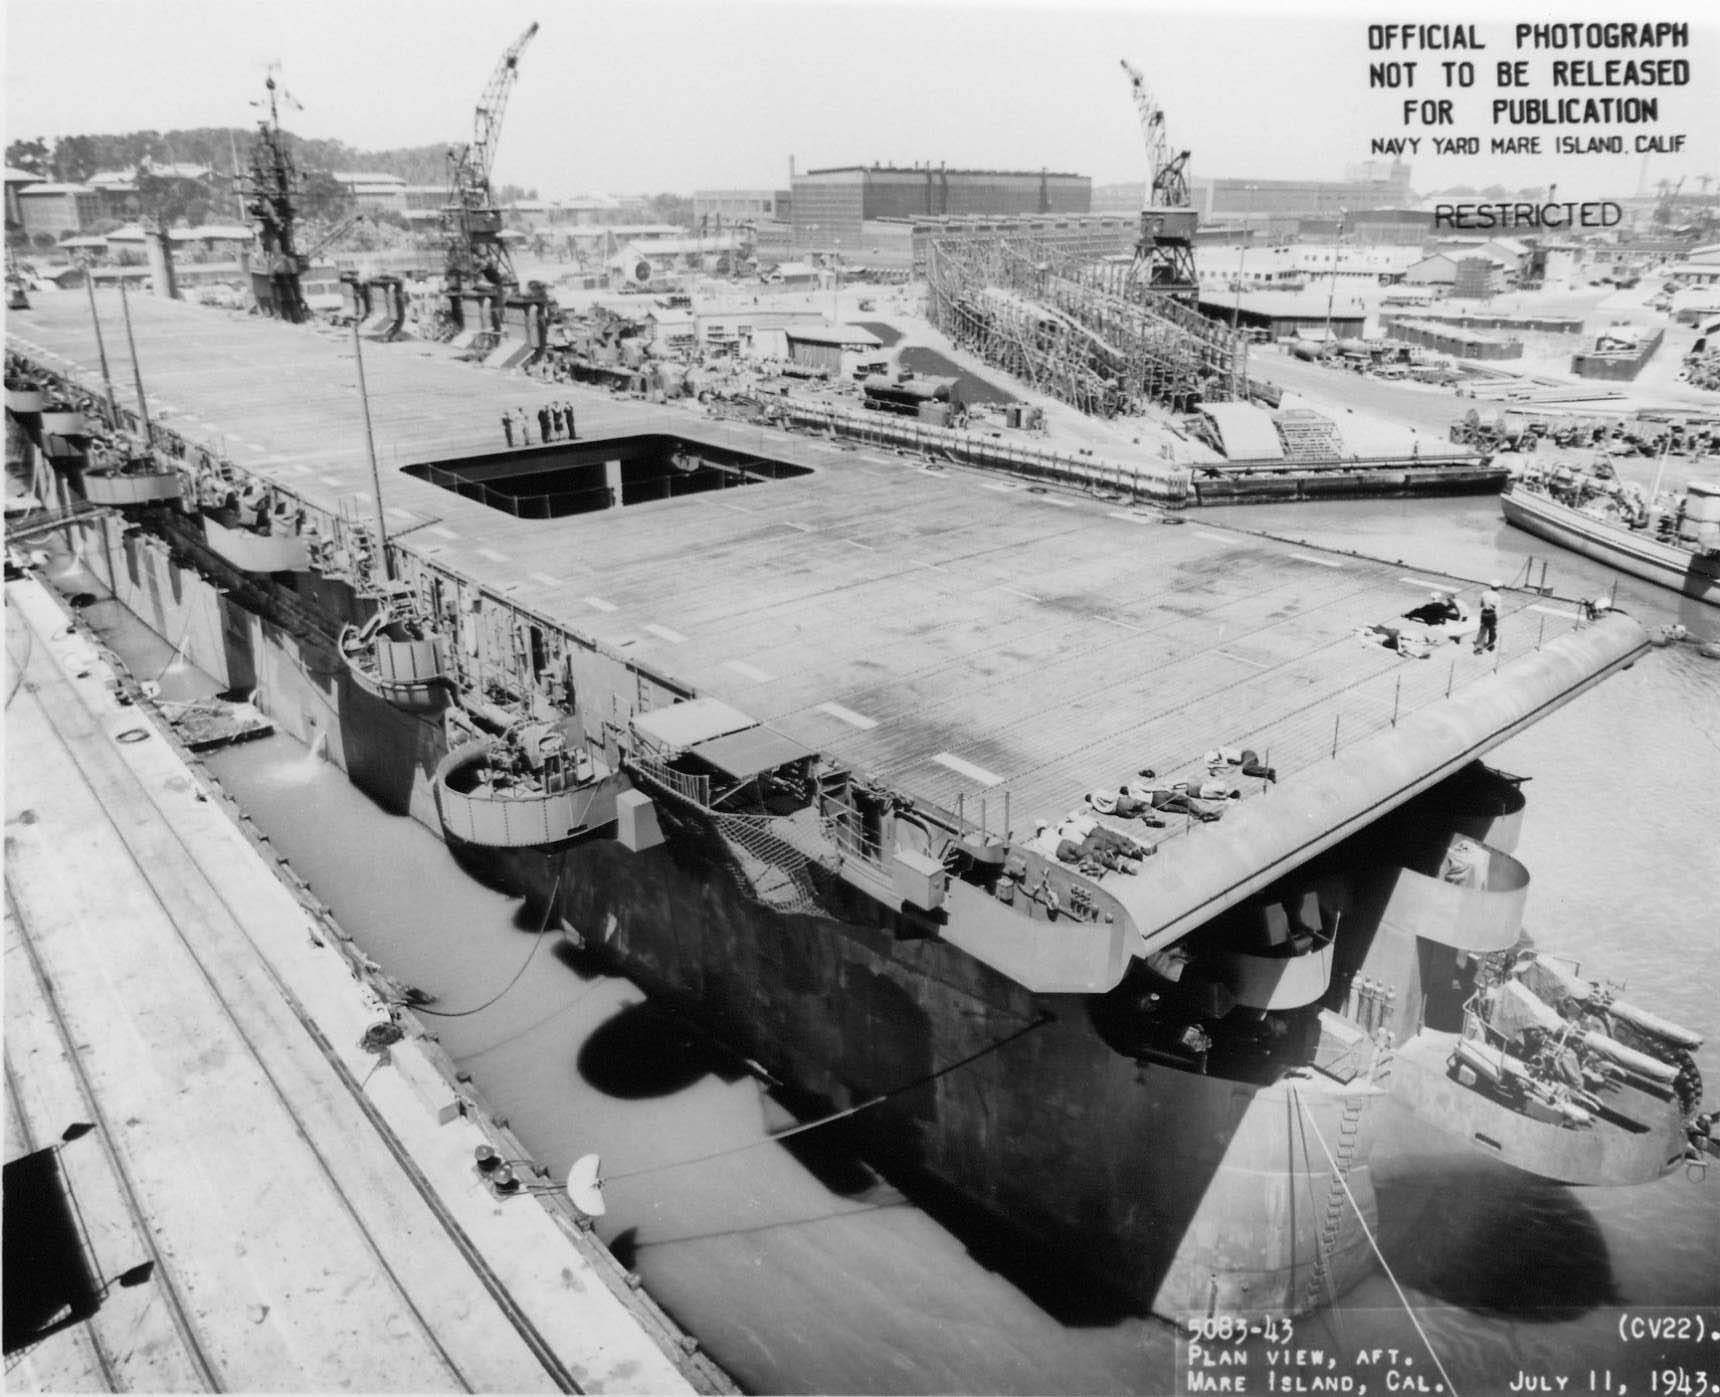 Carrier Independence under overhaul at Mare Island Naval Shipyard, California, United States, 11 Jul 1943; note hulls of submarines Spadefish and Trepang nearby